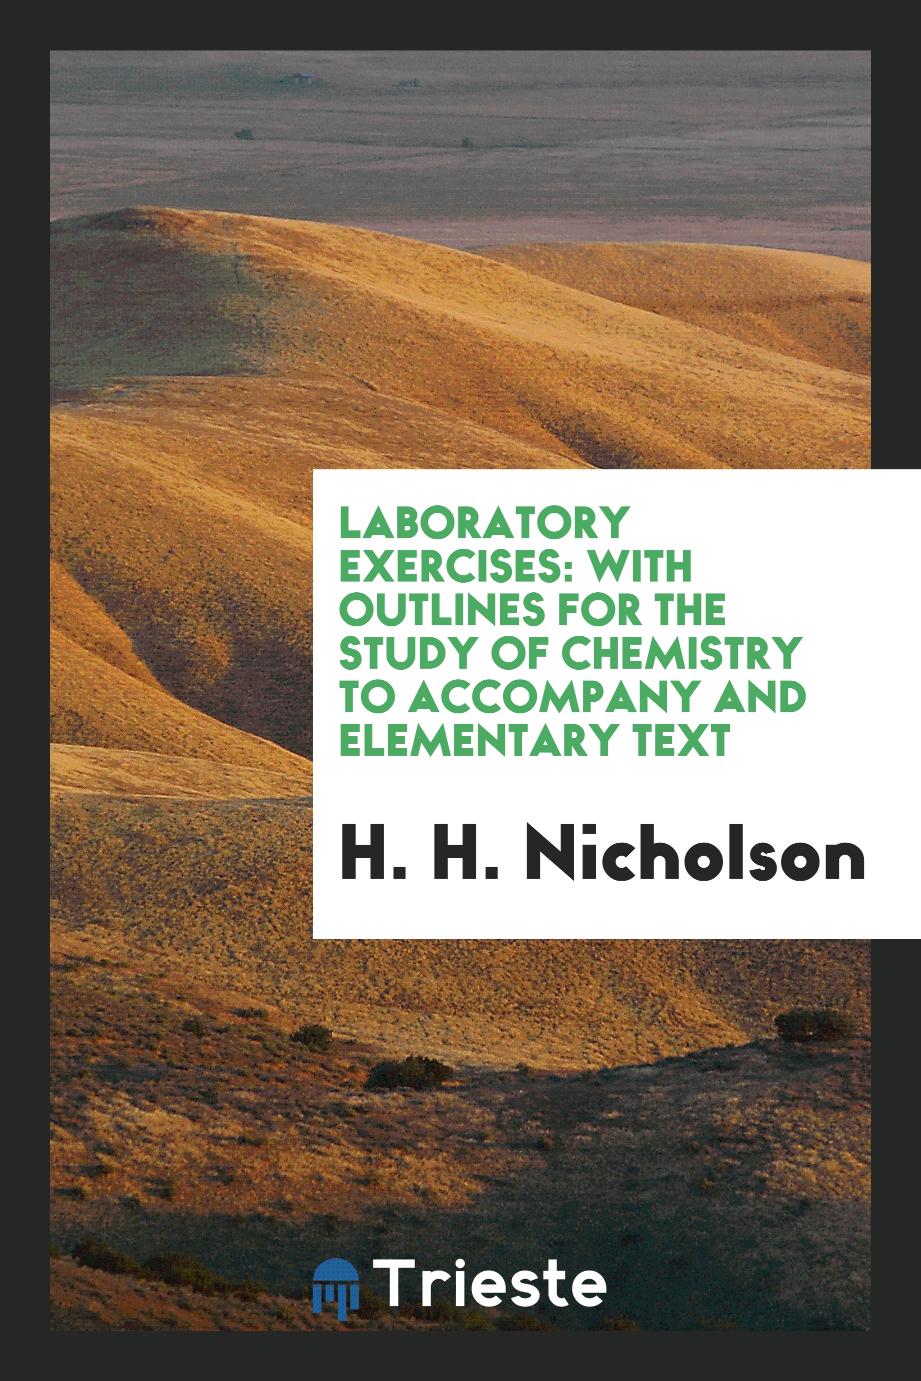 Laboratory Exercises: With Outlines for the Study of Chemistry to Accompany and Elementary Text